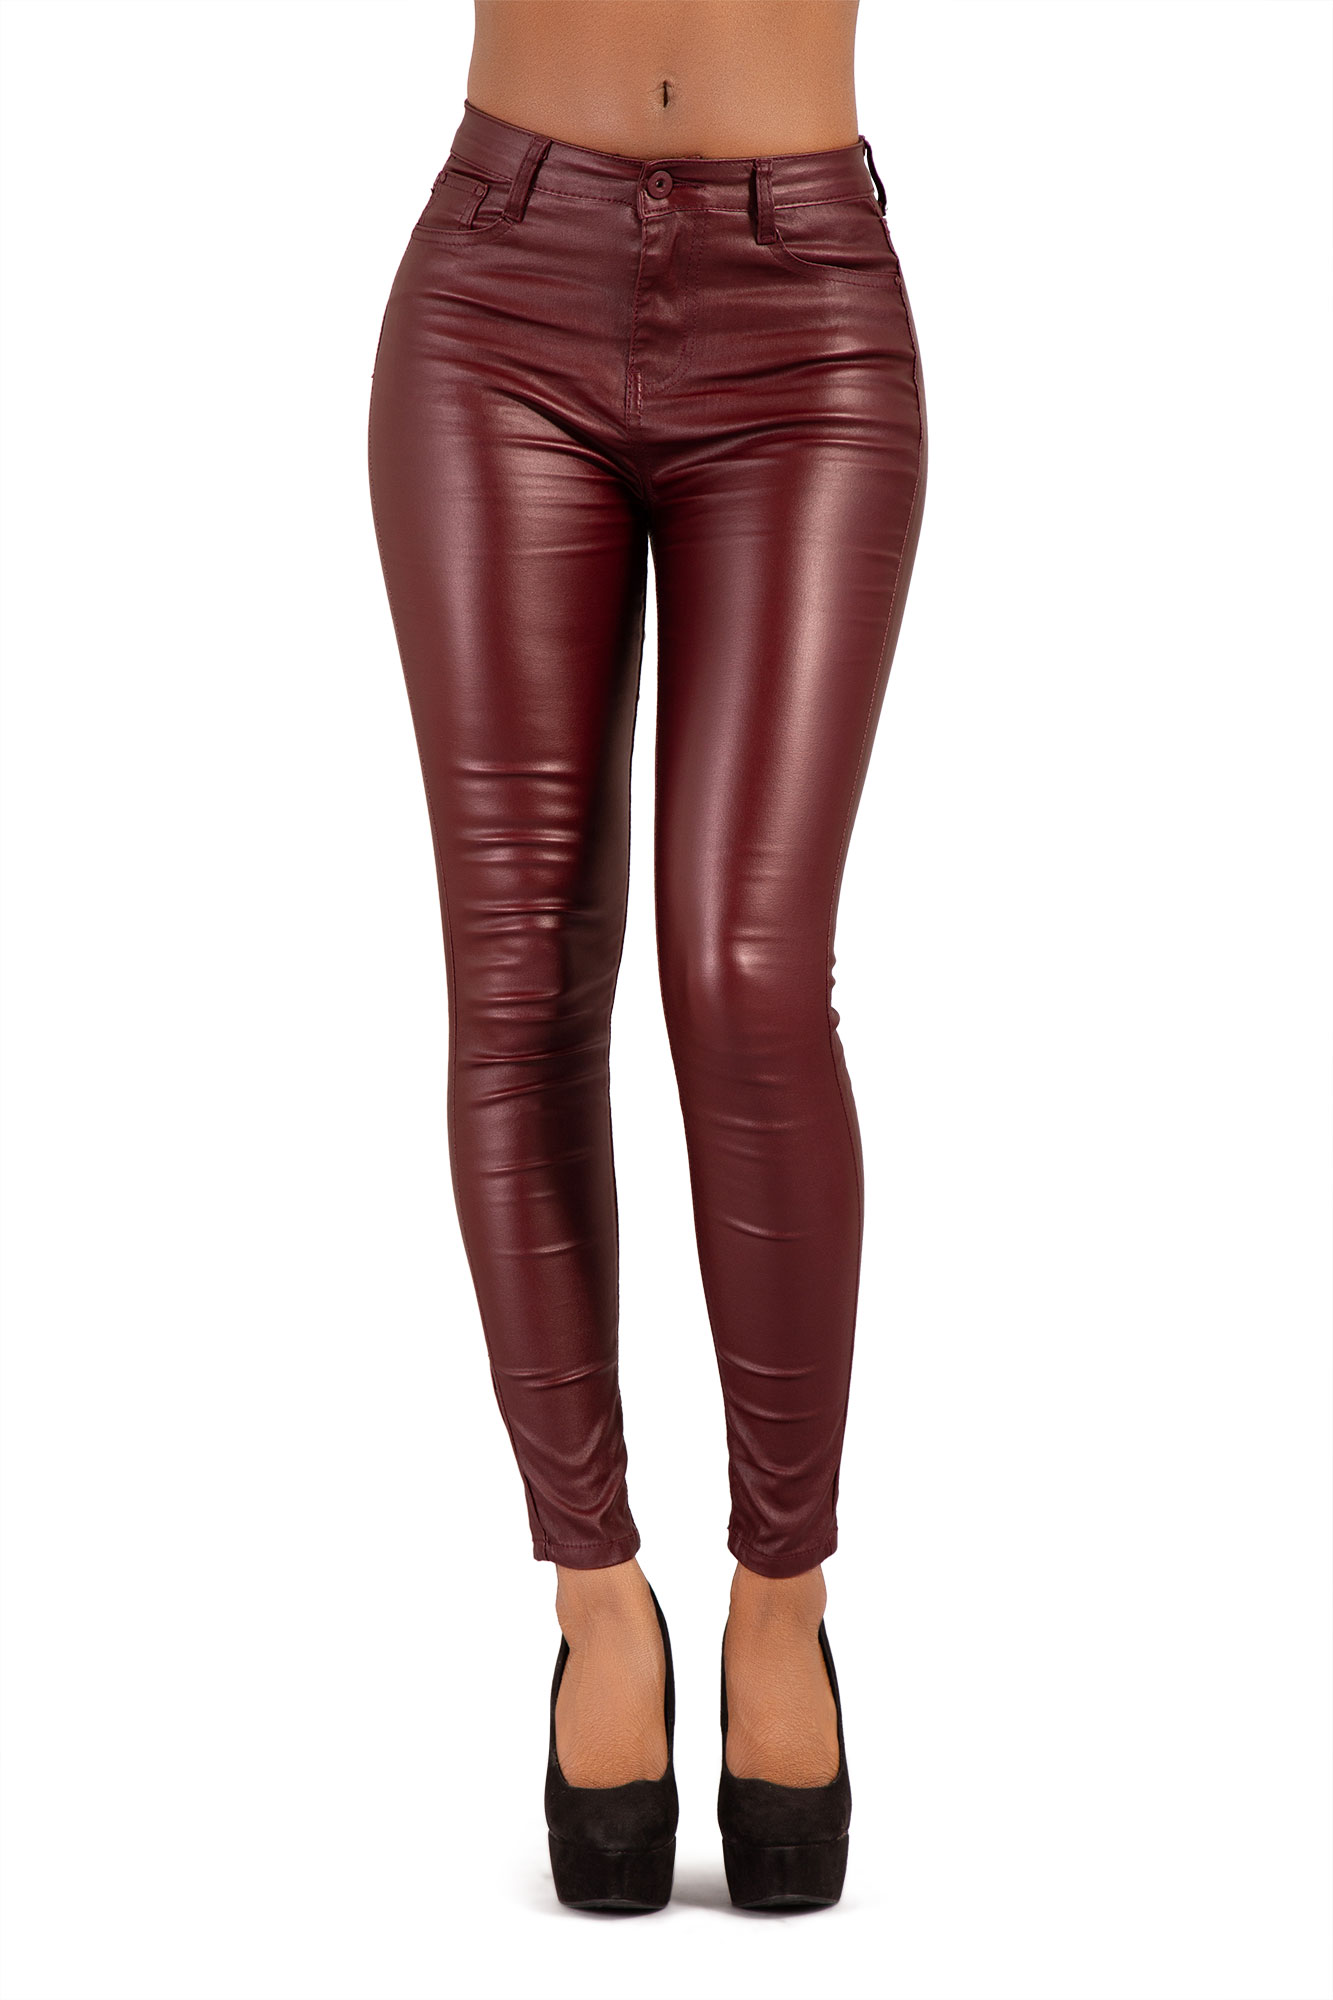 burgundy leather look jeans